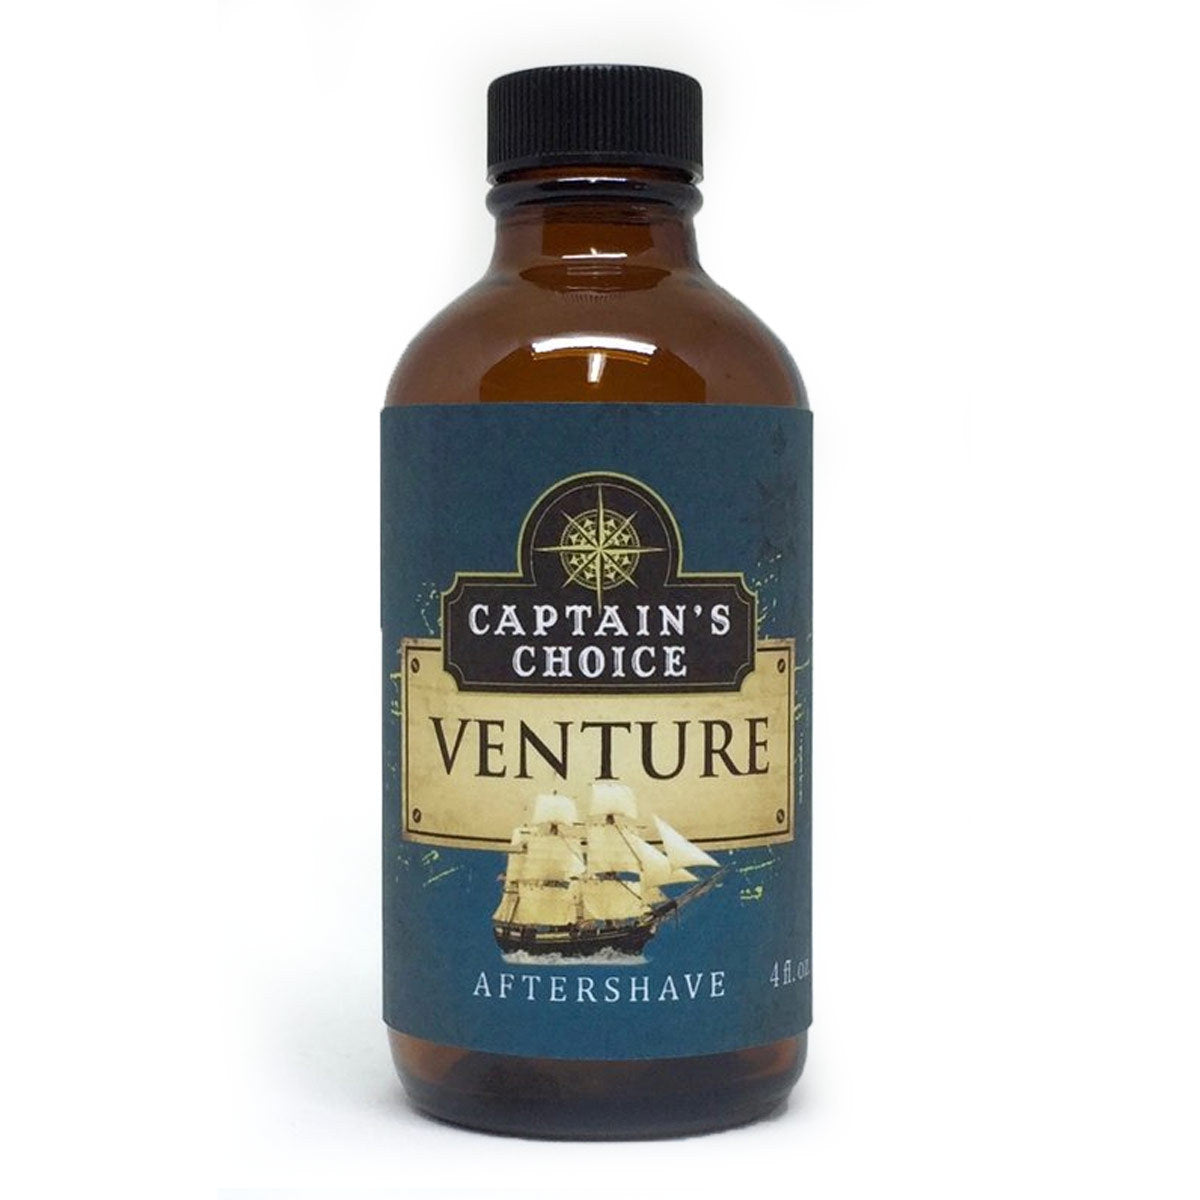 Primary image of Venture Aftershave